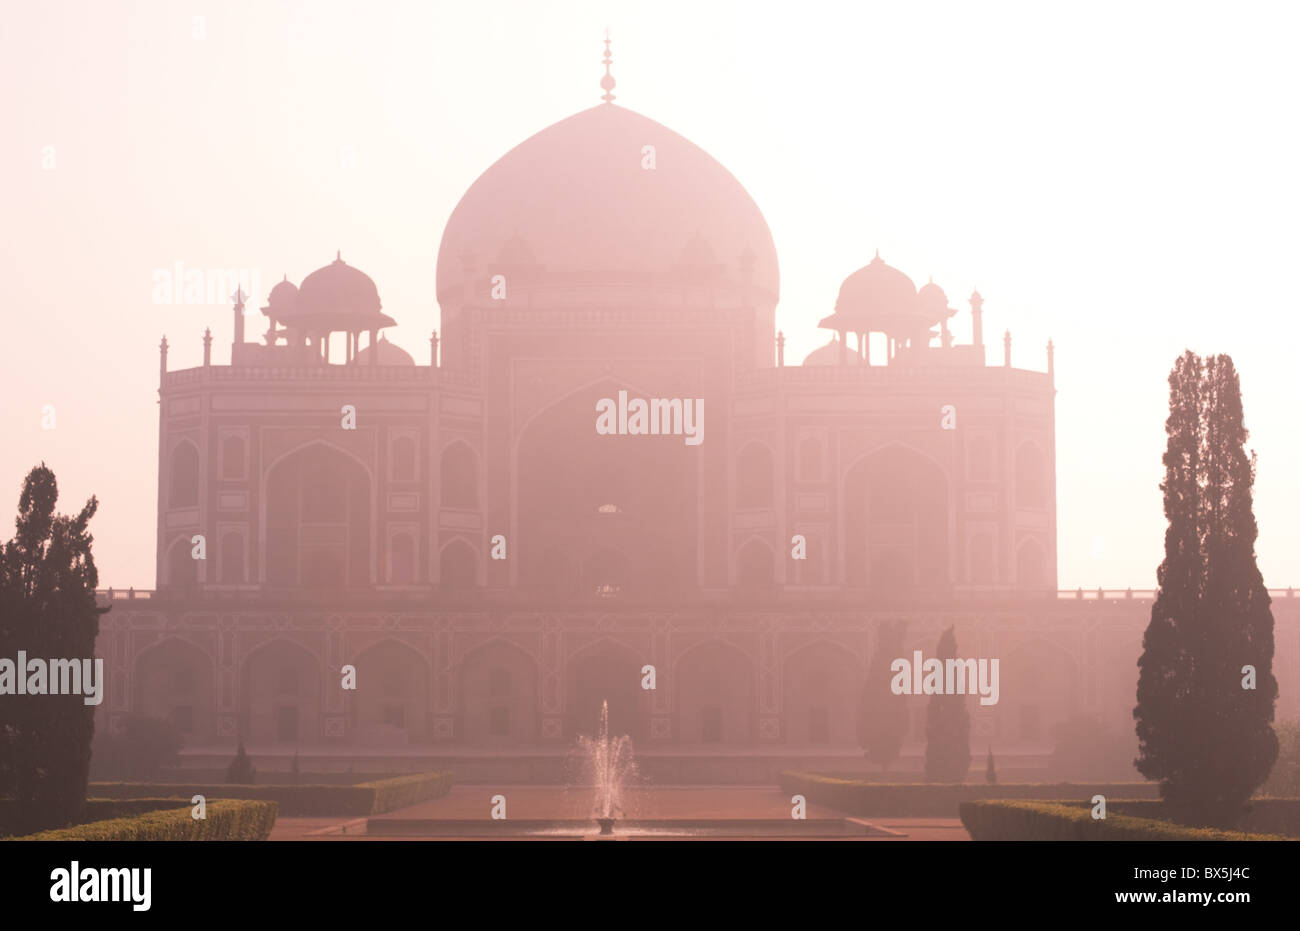 Humayun's Tomb, UNESCO World Heritage Site, the first great example of a Mughal garden tomb, in mist at sunrise Delhi, India Stock Photo